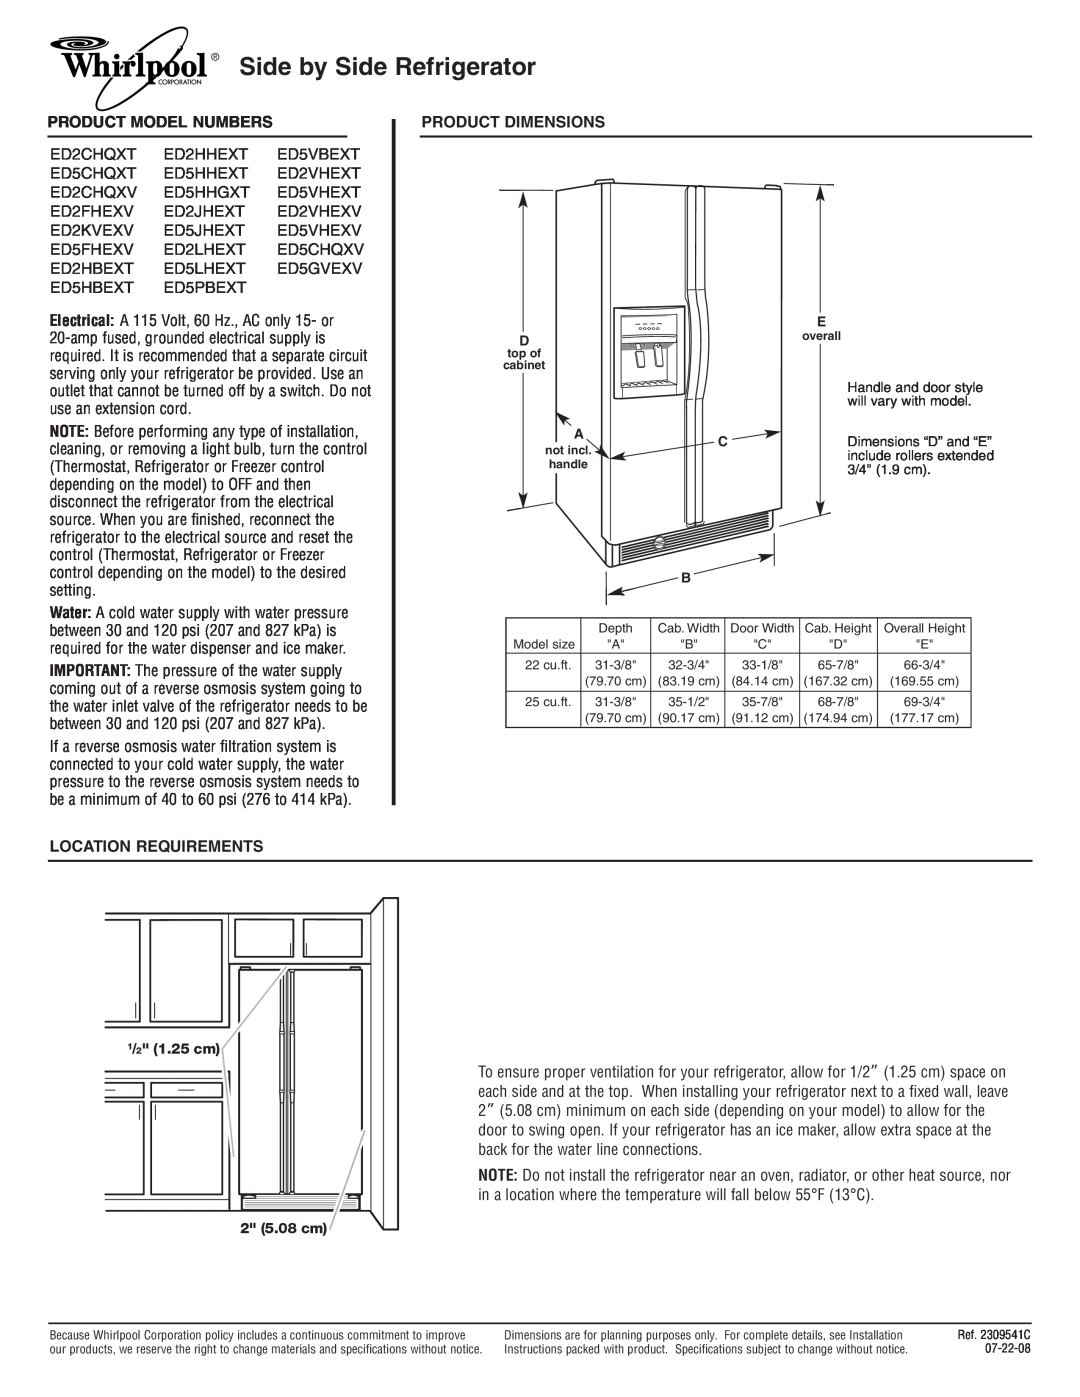 Whirlpool ED2CHQXV dimensions Side by Side Refrigerator, Product Model Numbers, Product Dimensions, Location Requirements 